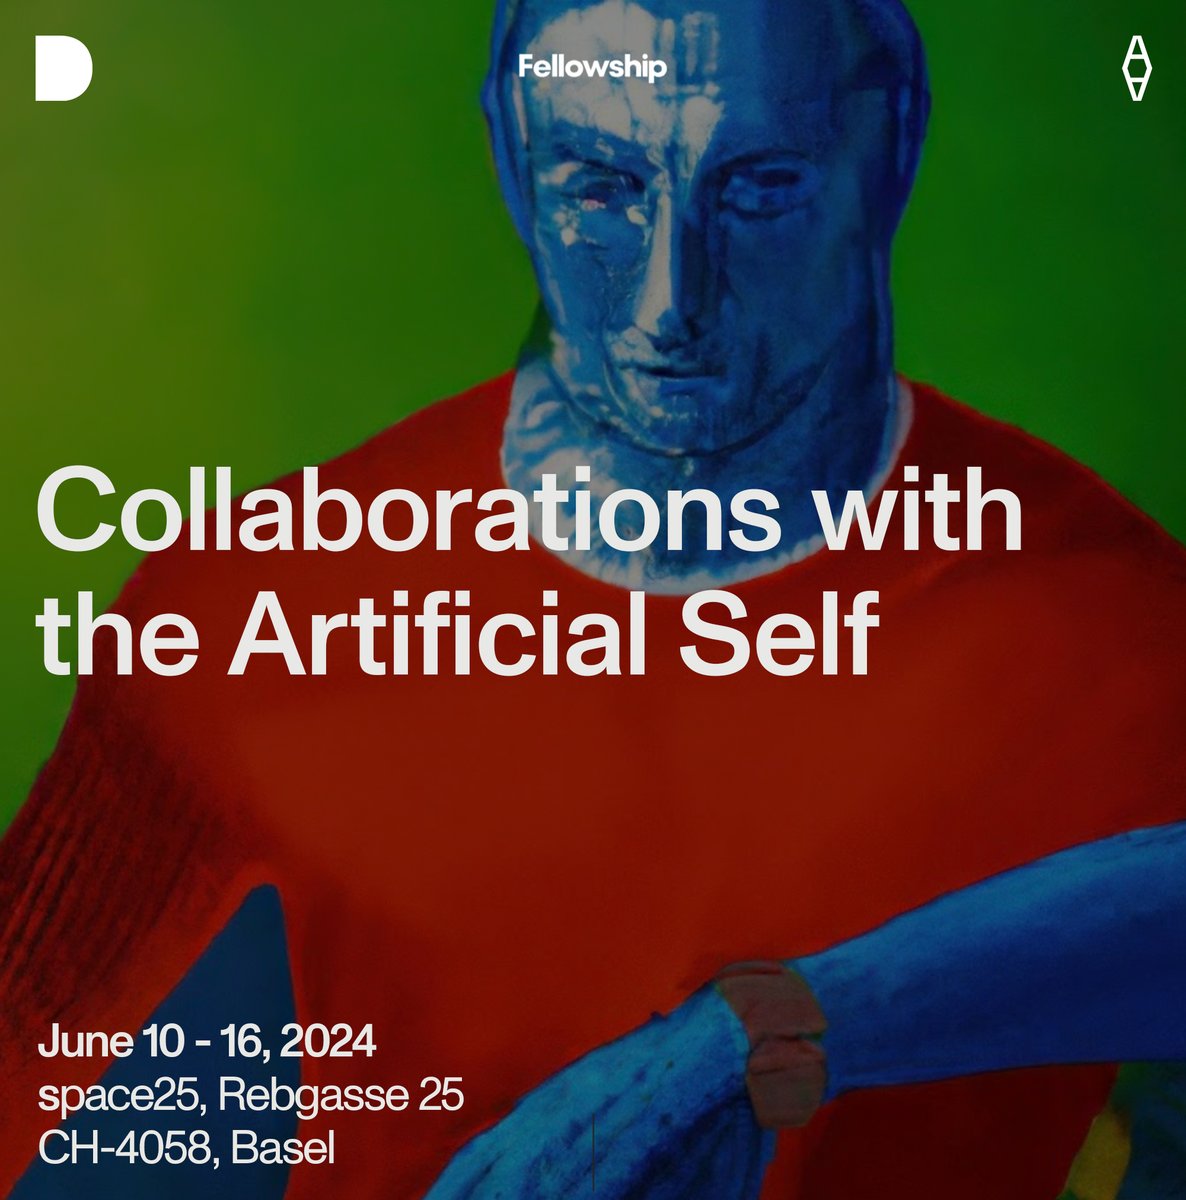 Presenting: Collaborations with the Artificial Self Join us at Fellowship’s most ambitious exhibition to date, opening during Art Basel from June 10-16 at space25 in Basel, Switzerland. Explore the evolution of AI in art, from the 2010s deep learning revolution to today's